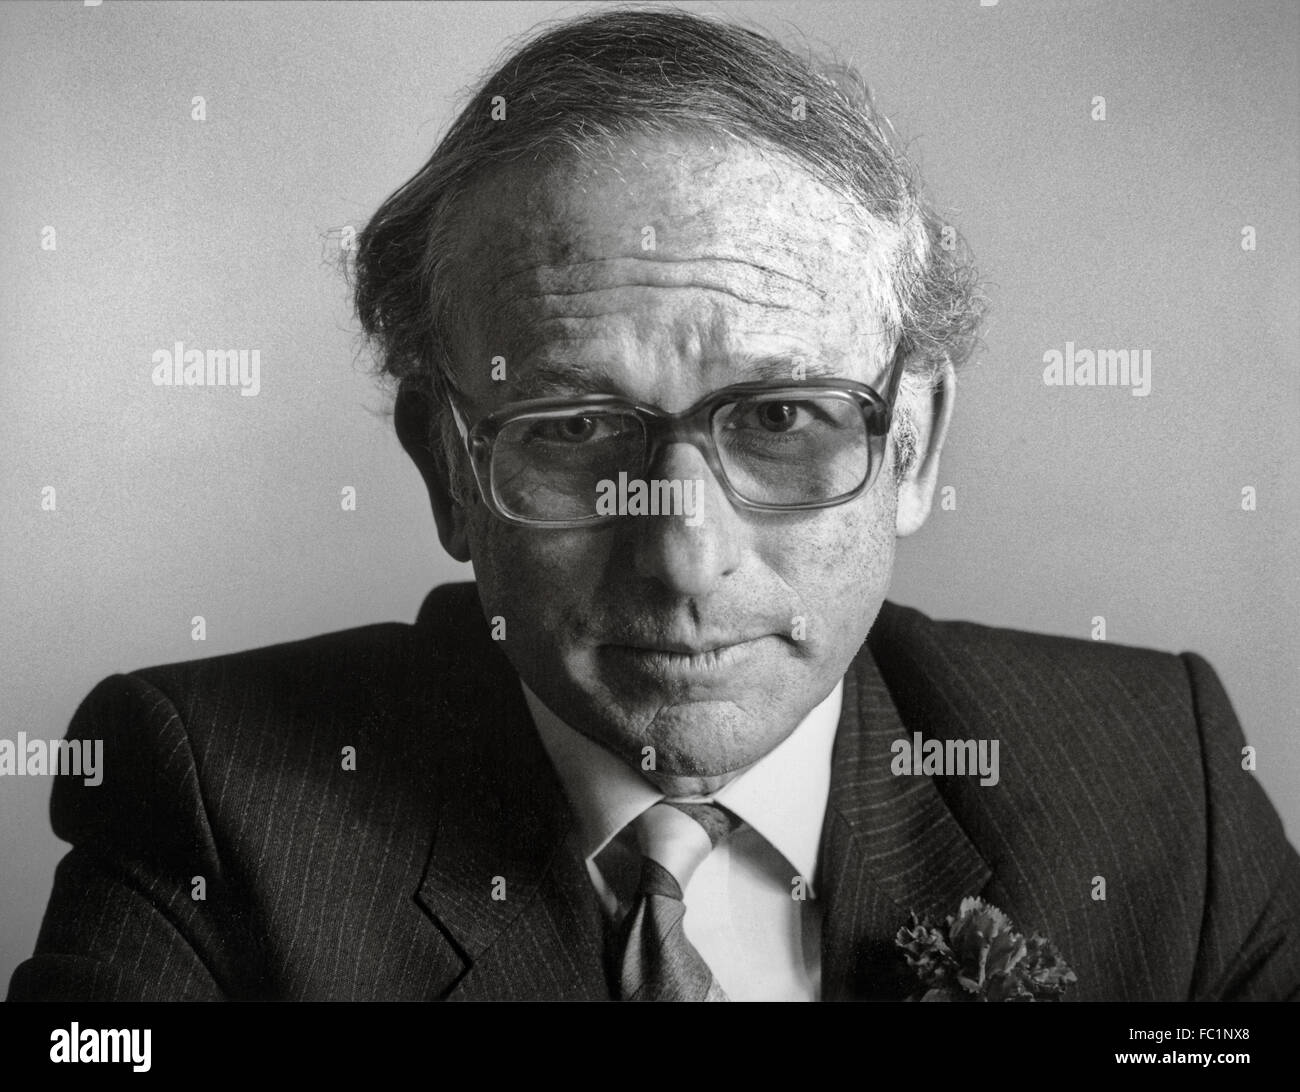 Greville Ewan Janner, Baron Janner of Braunstone, QC was a British politician, barrister and writer. He became a Leicester Labour MP in the 1970 general election. Stock Photo